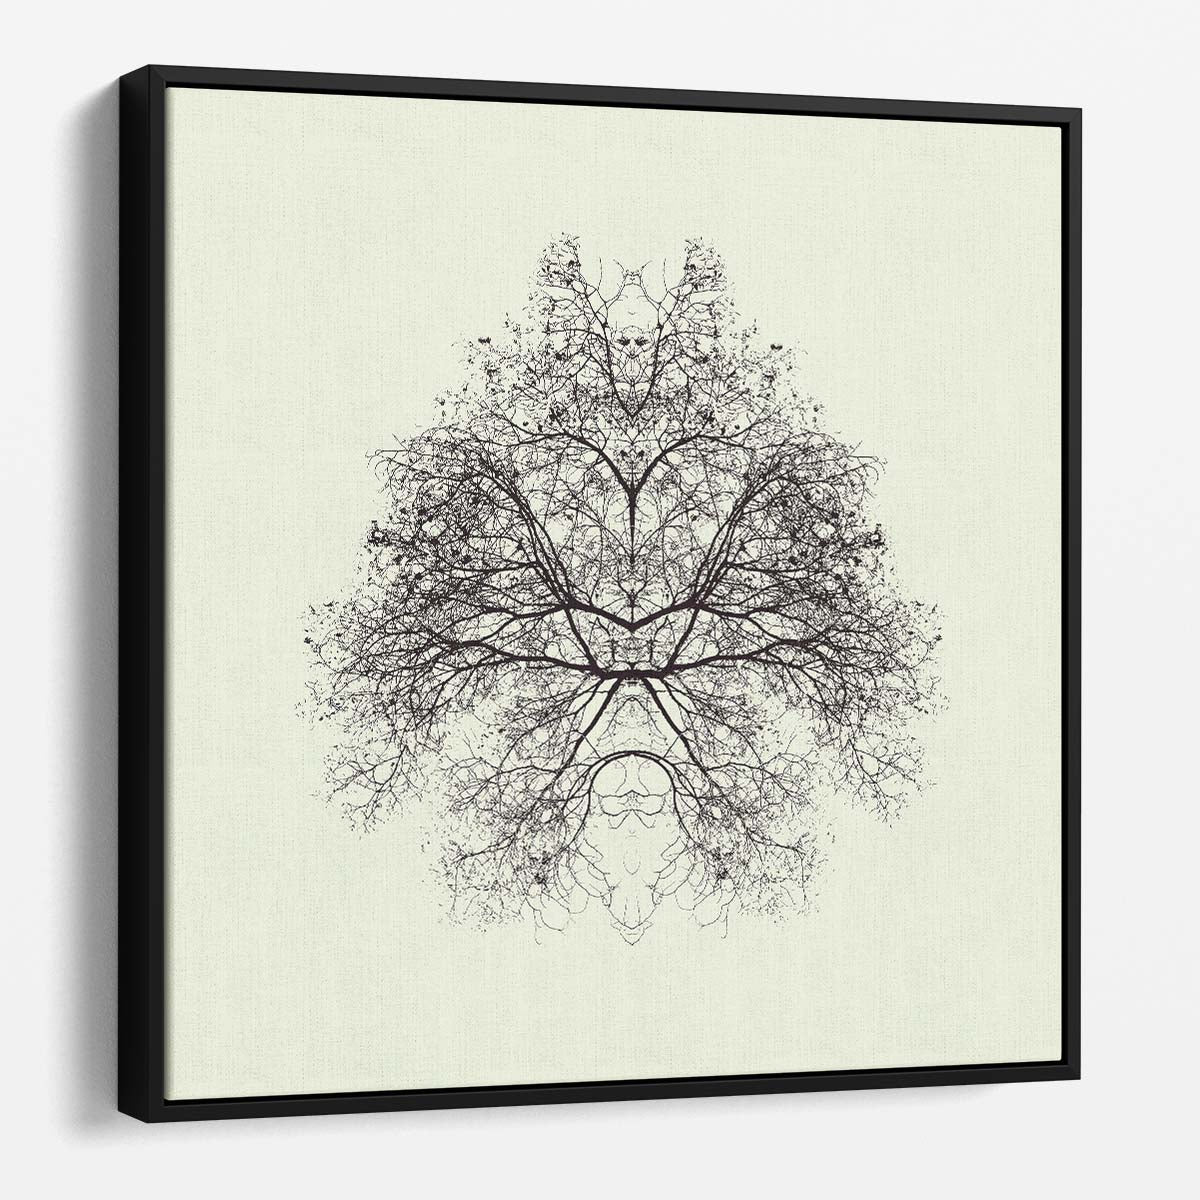 Abstract Tree Pattern Inspired by Rorschach Test Photography Wall Art by Luxuriance Designs. Made in USA.